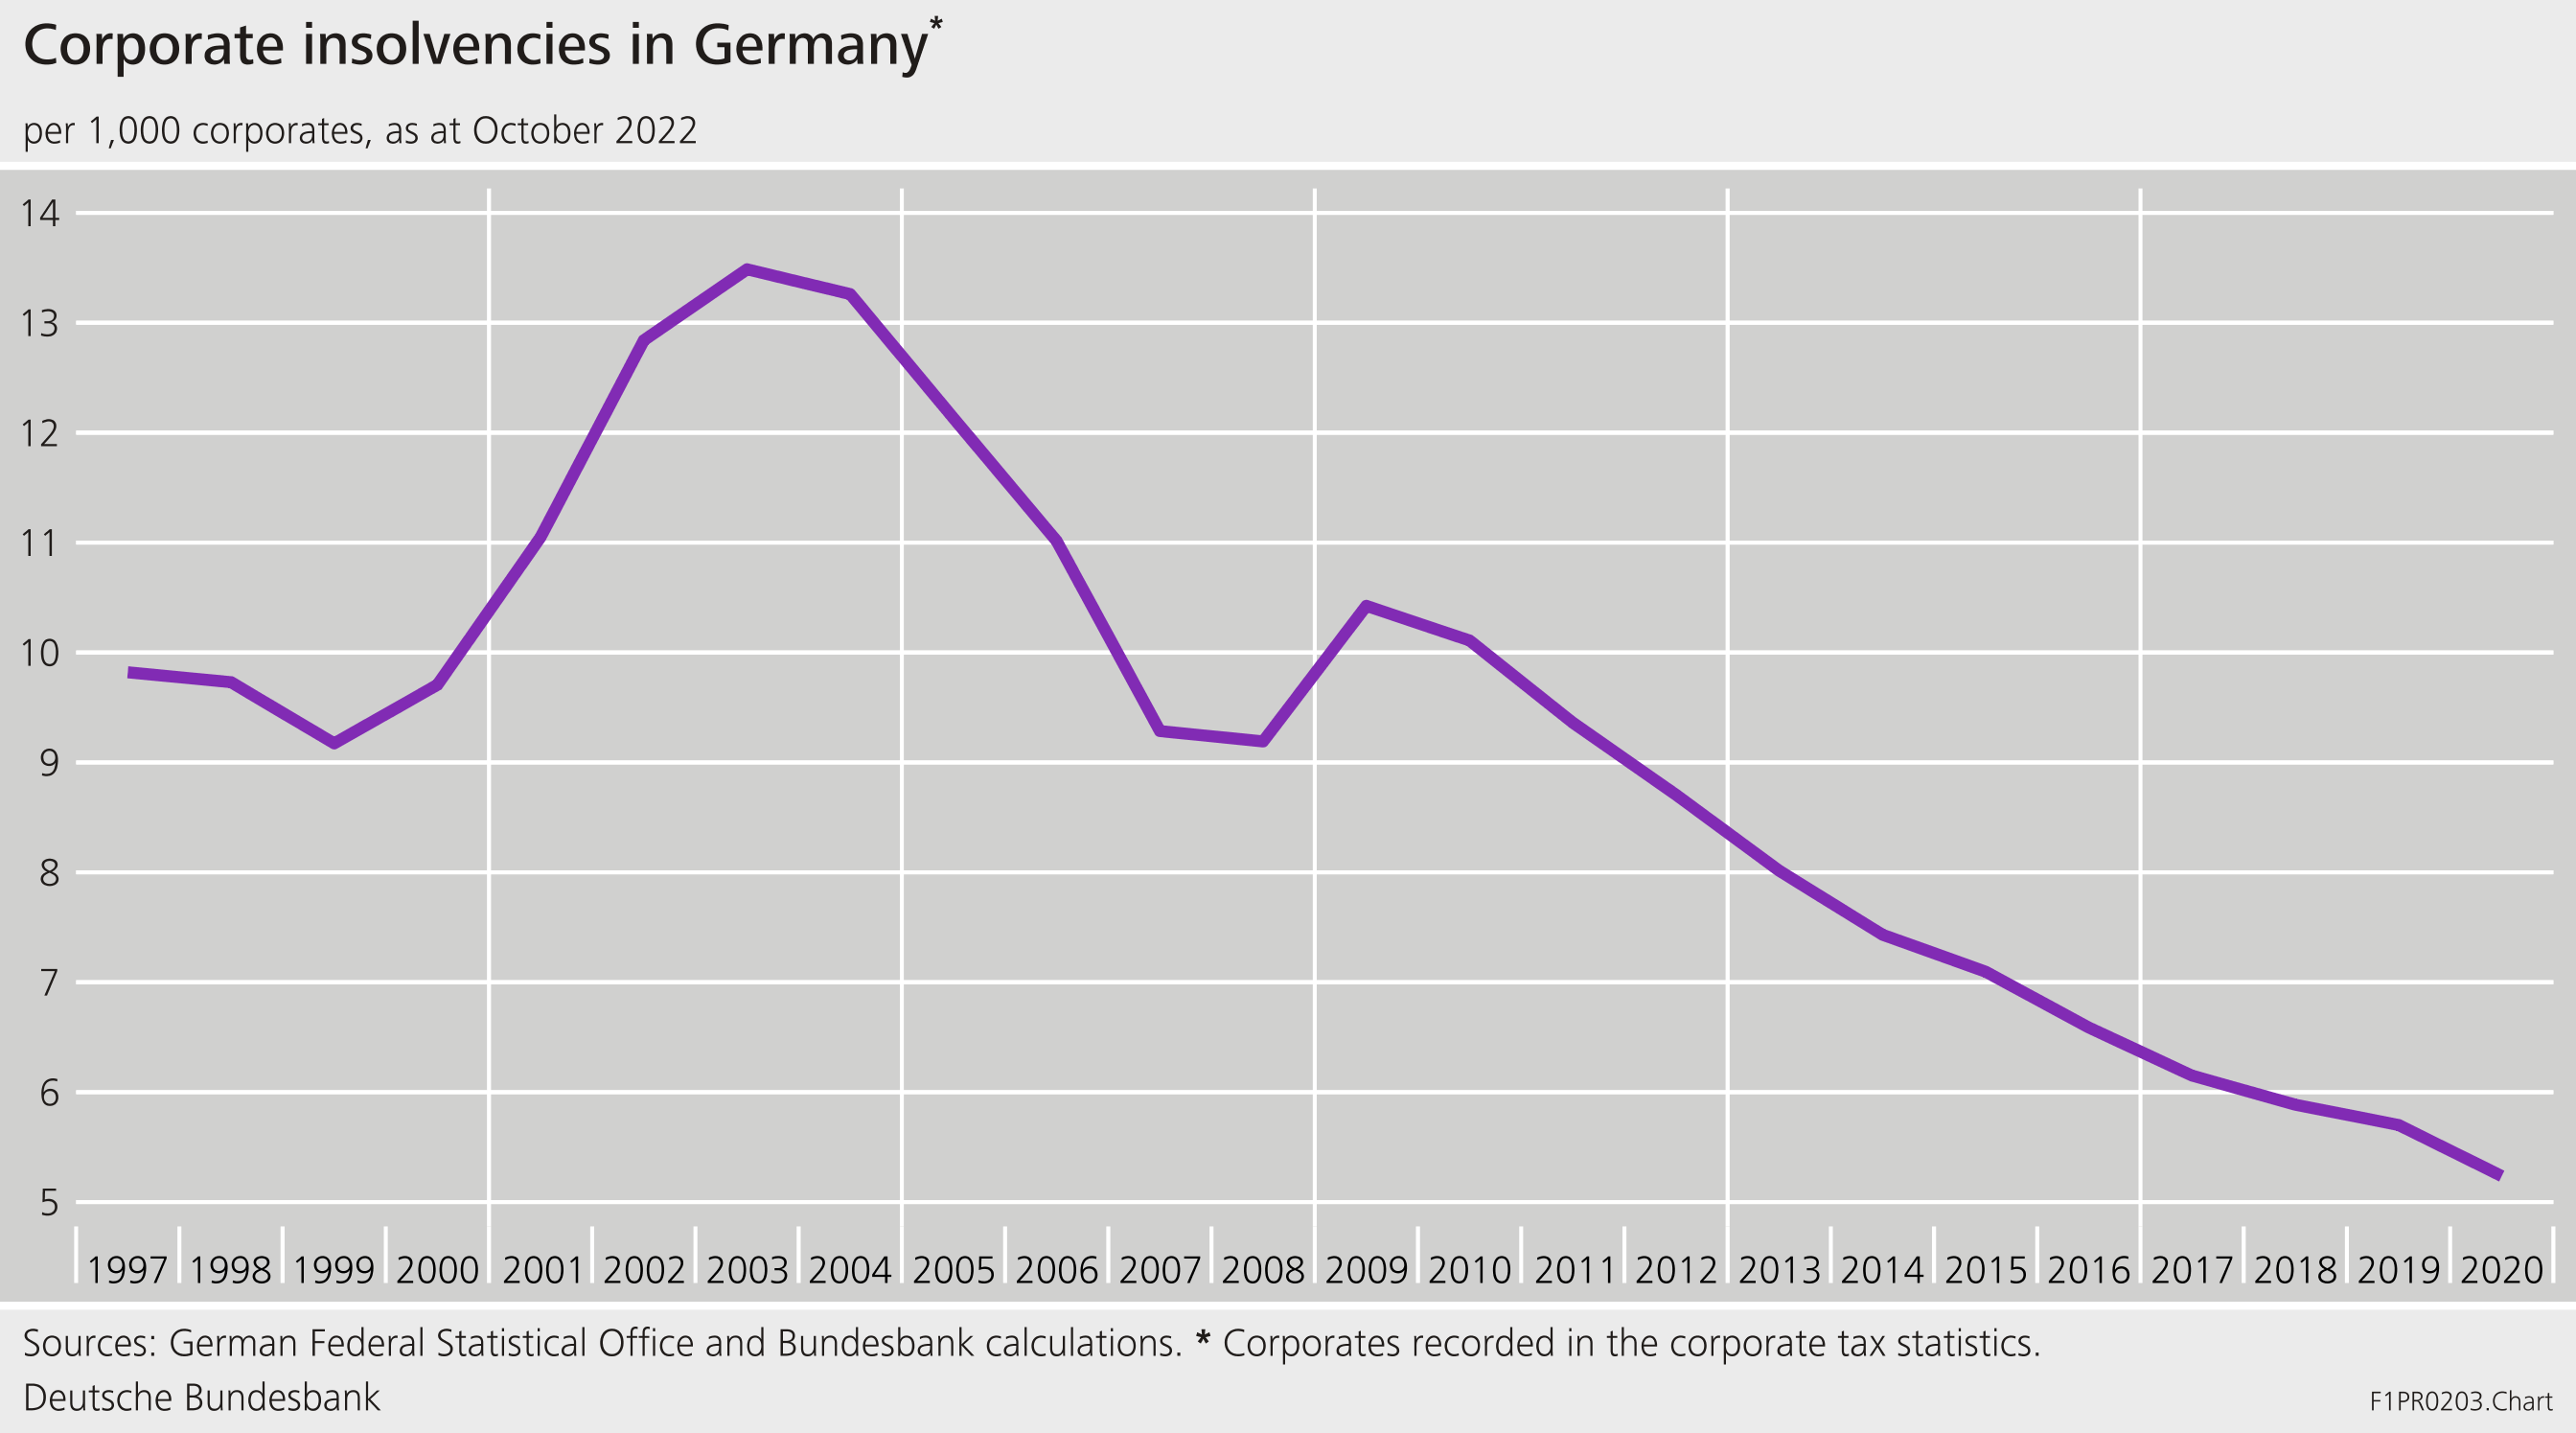 Figure 1: Corporate insolvencies in Germany